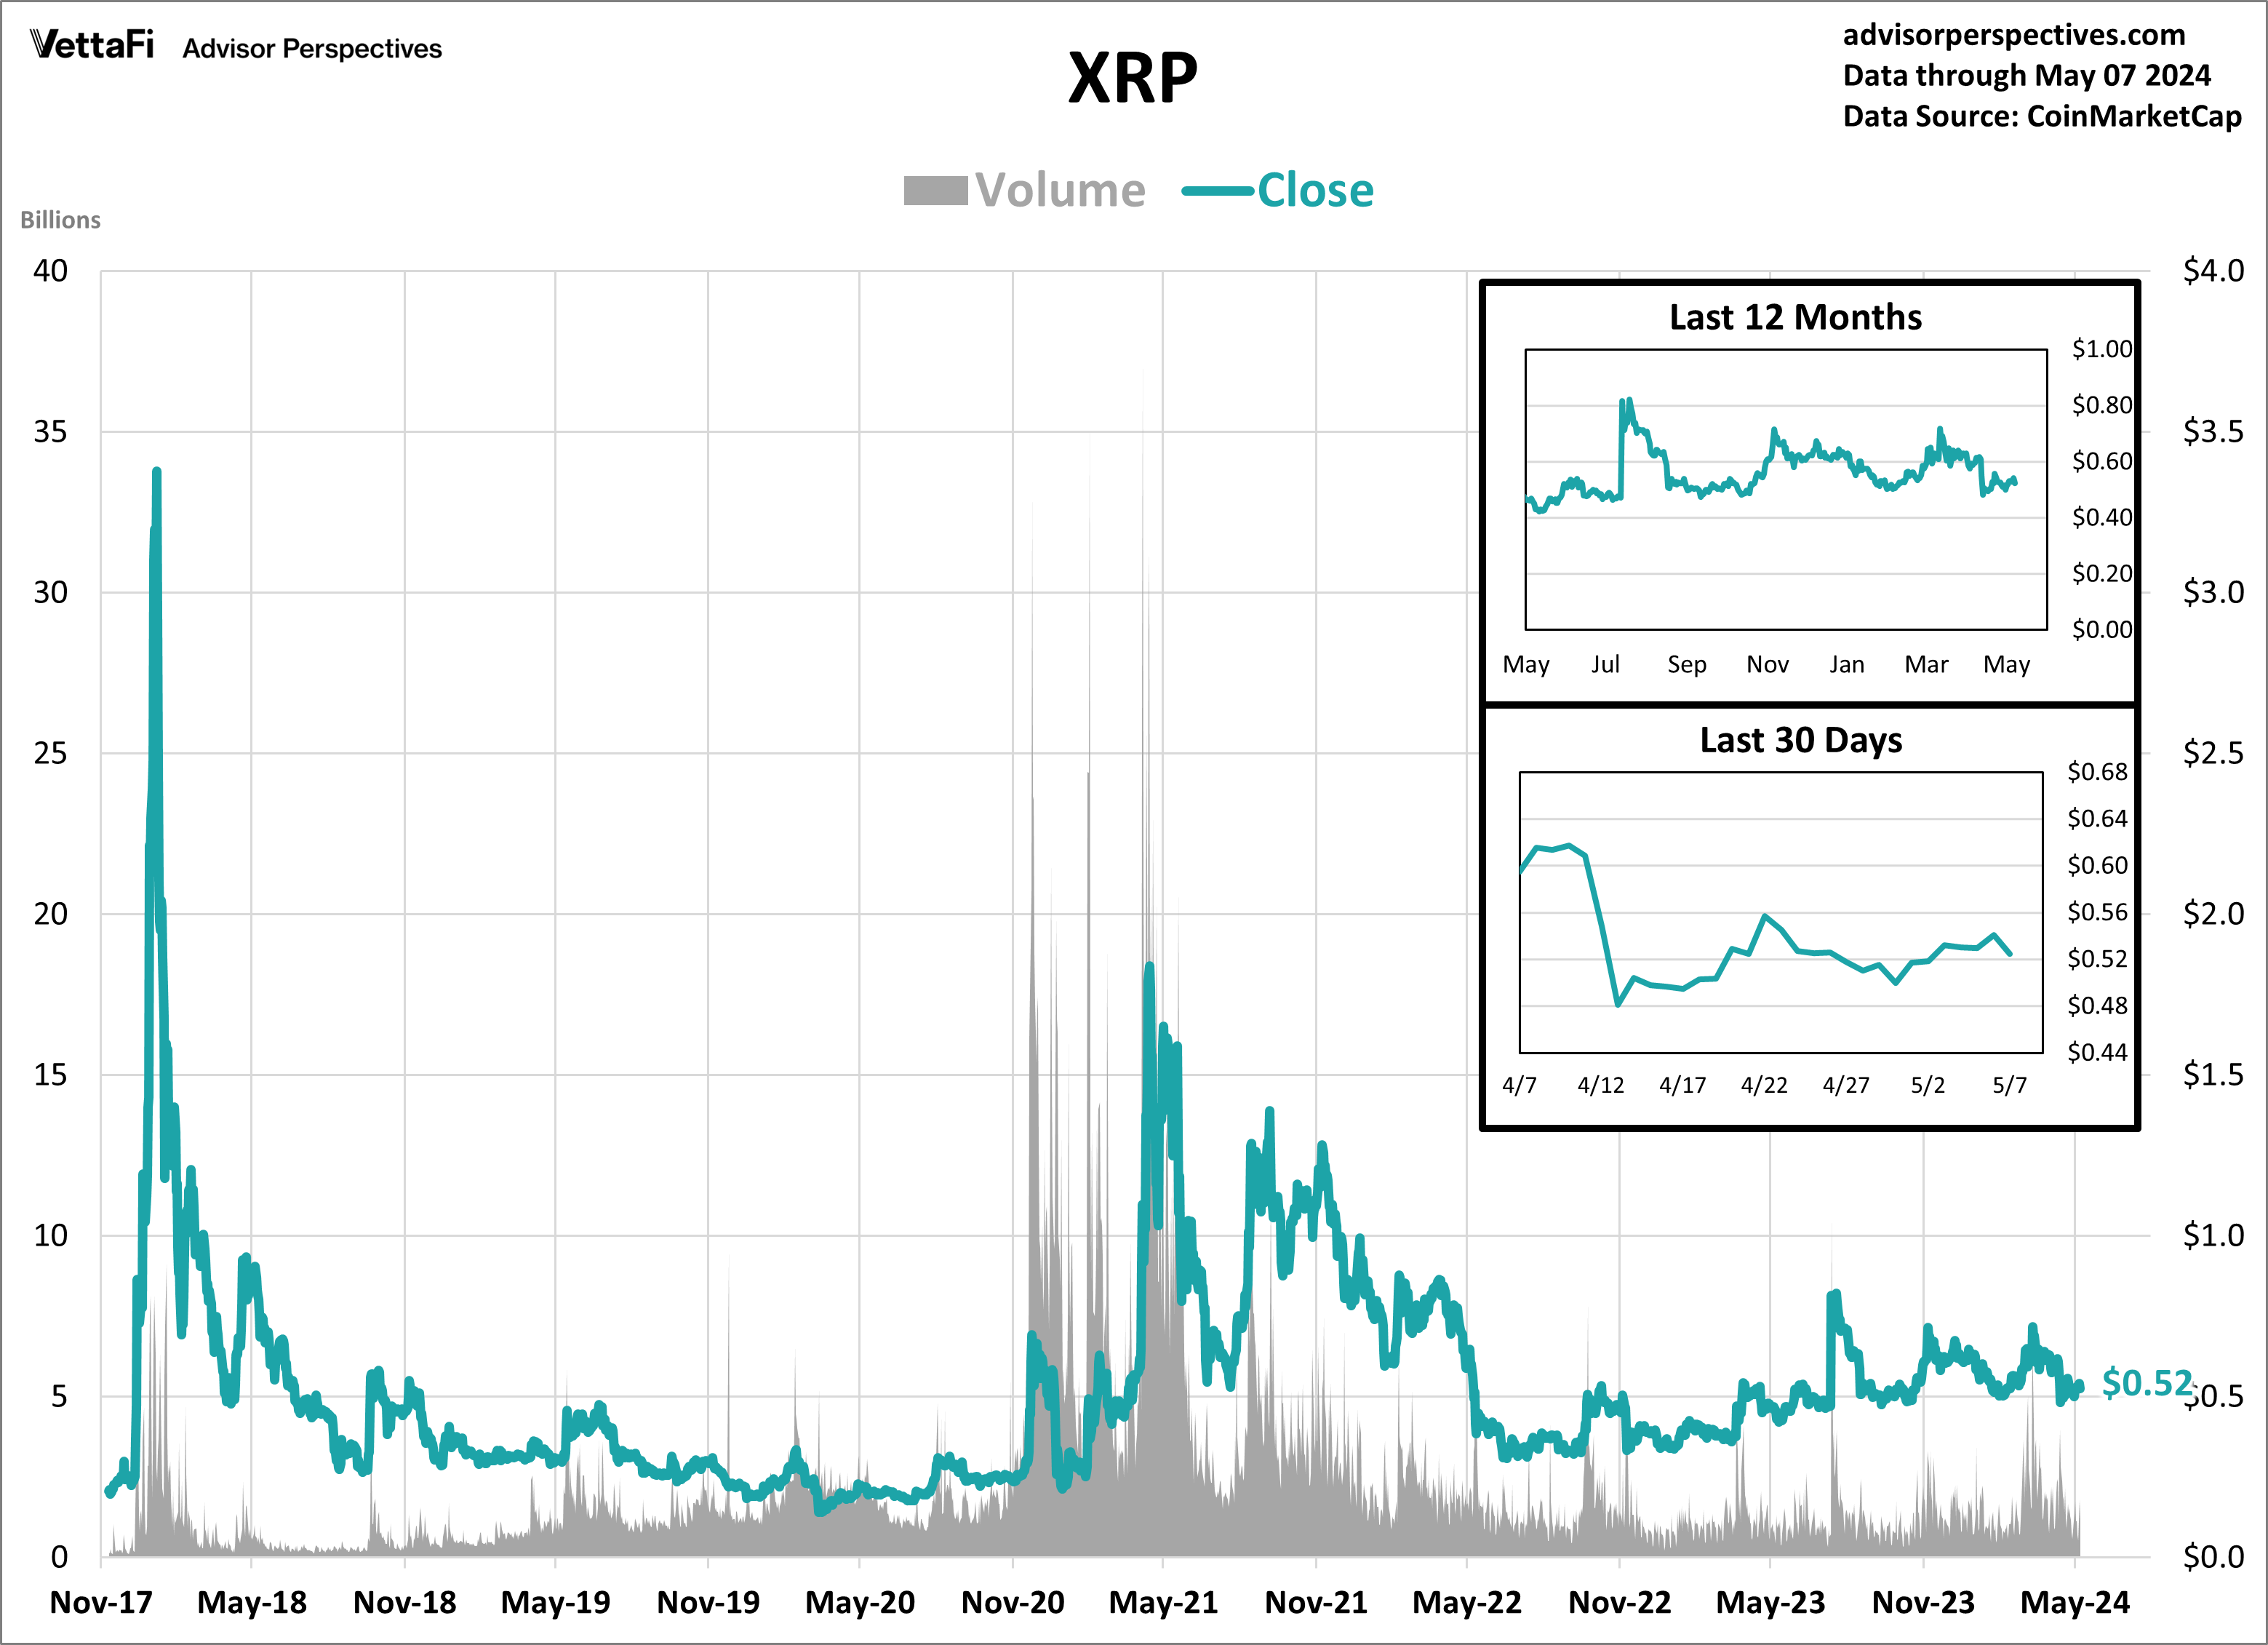 XRP Volume and Close